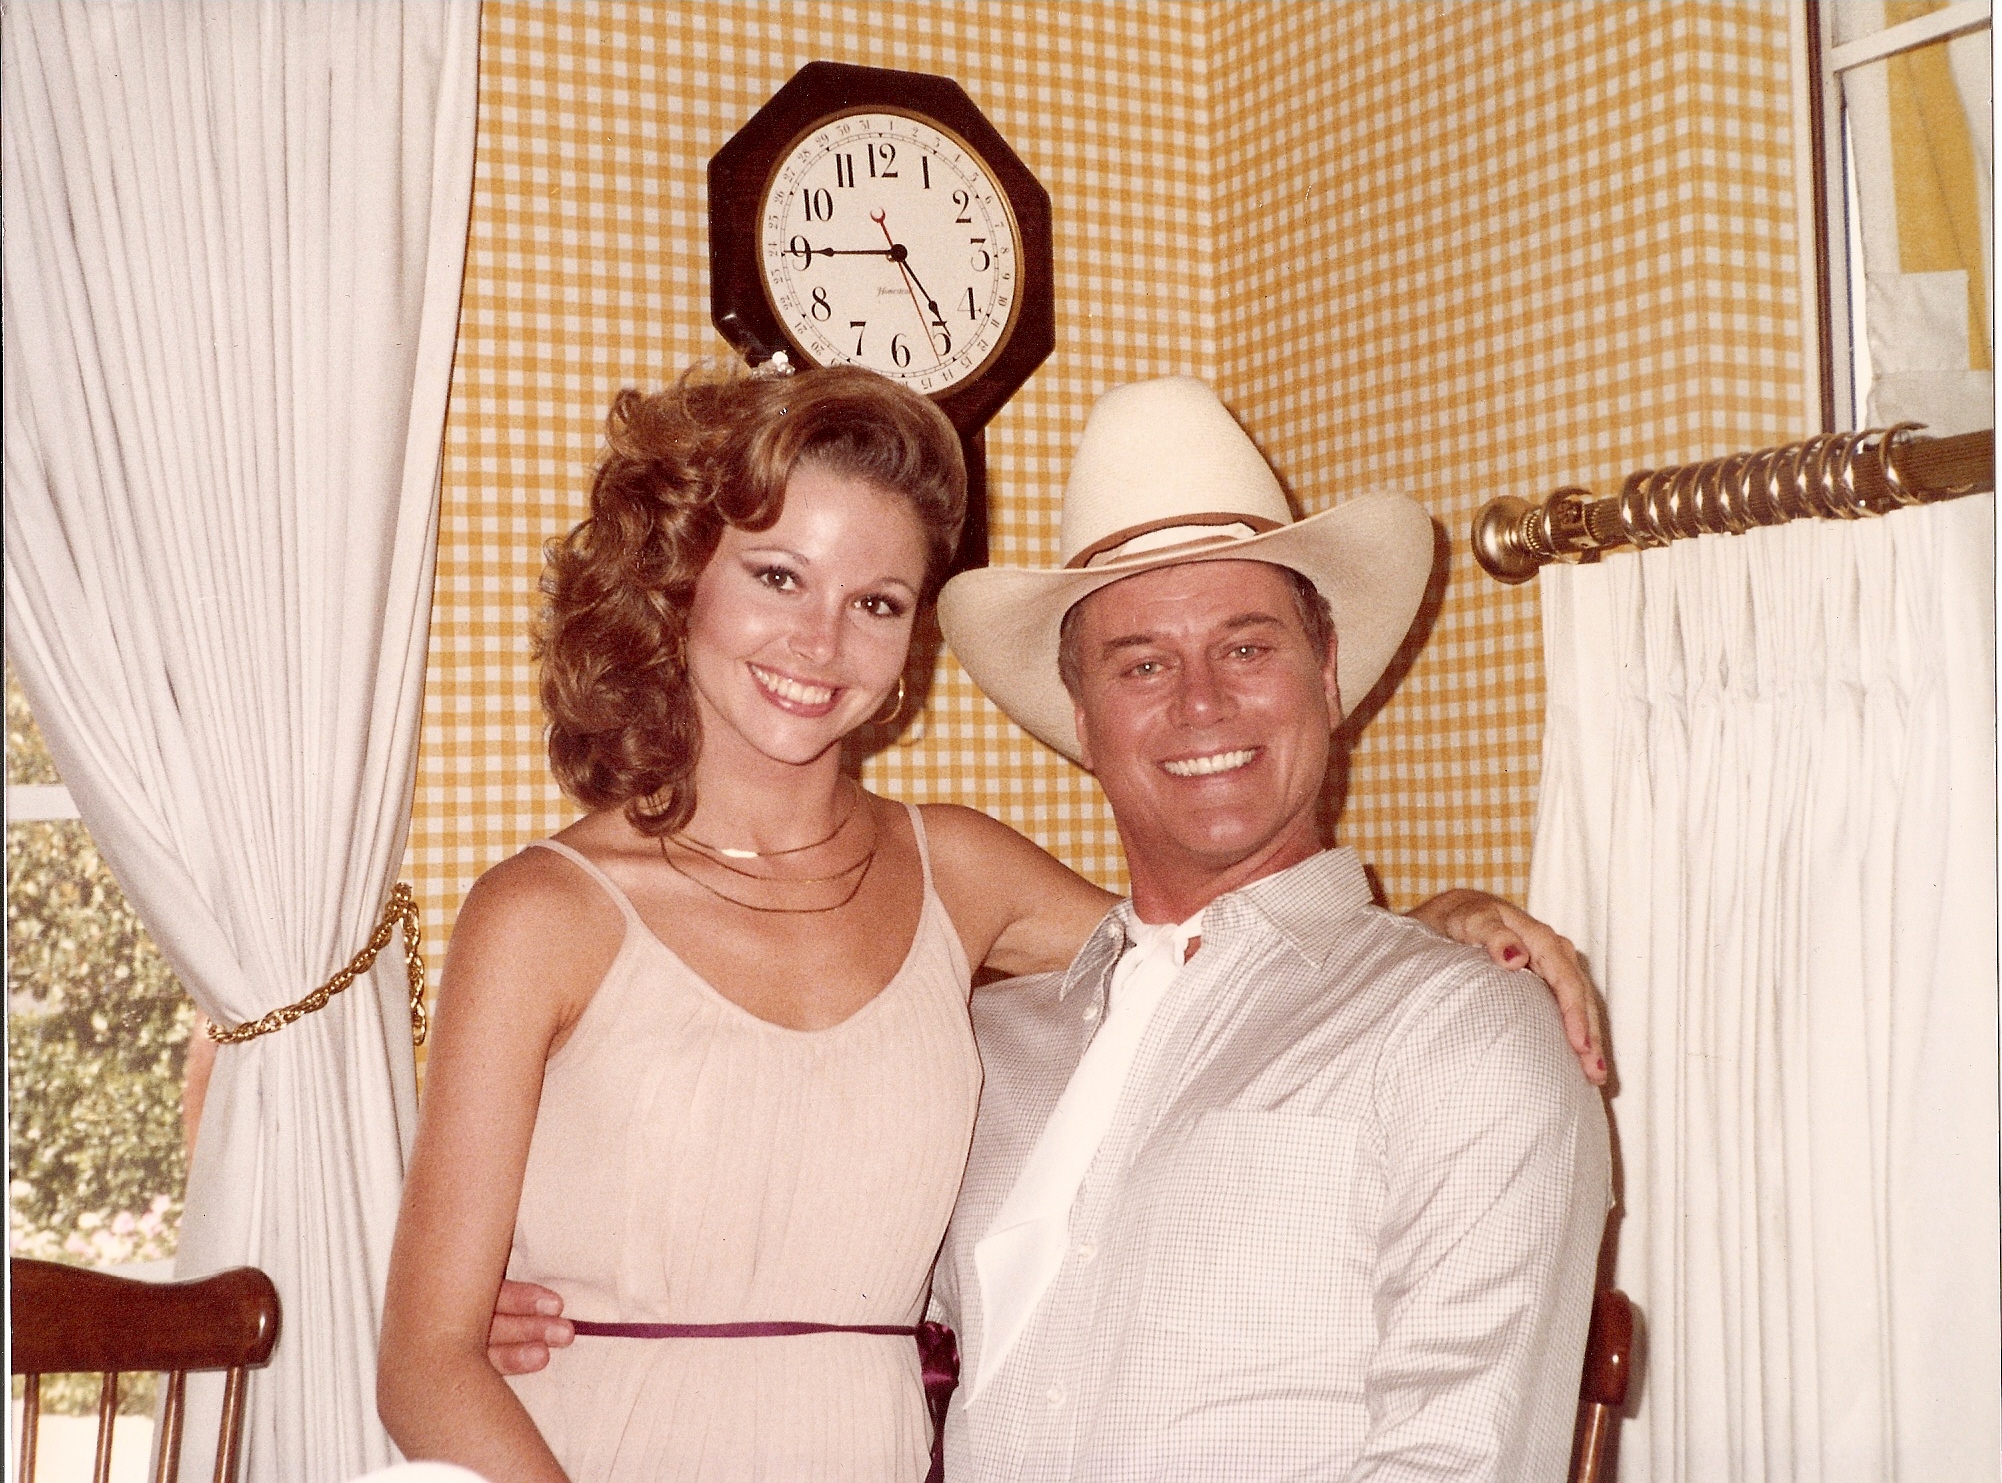 With the great Larry Hagman on the set of Dallas